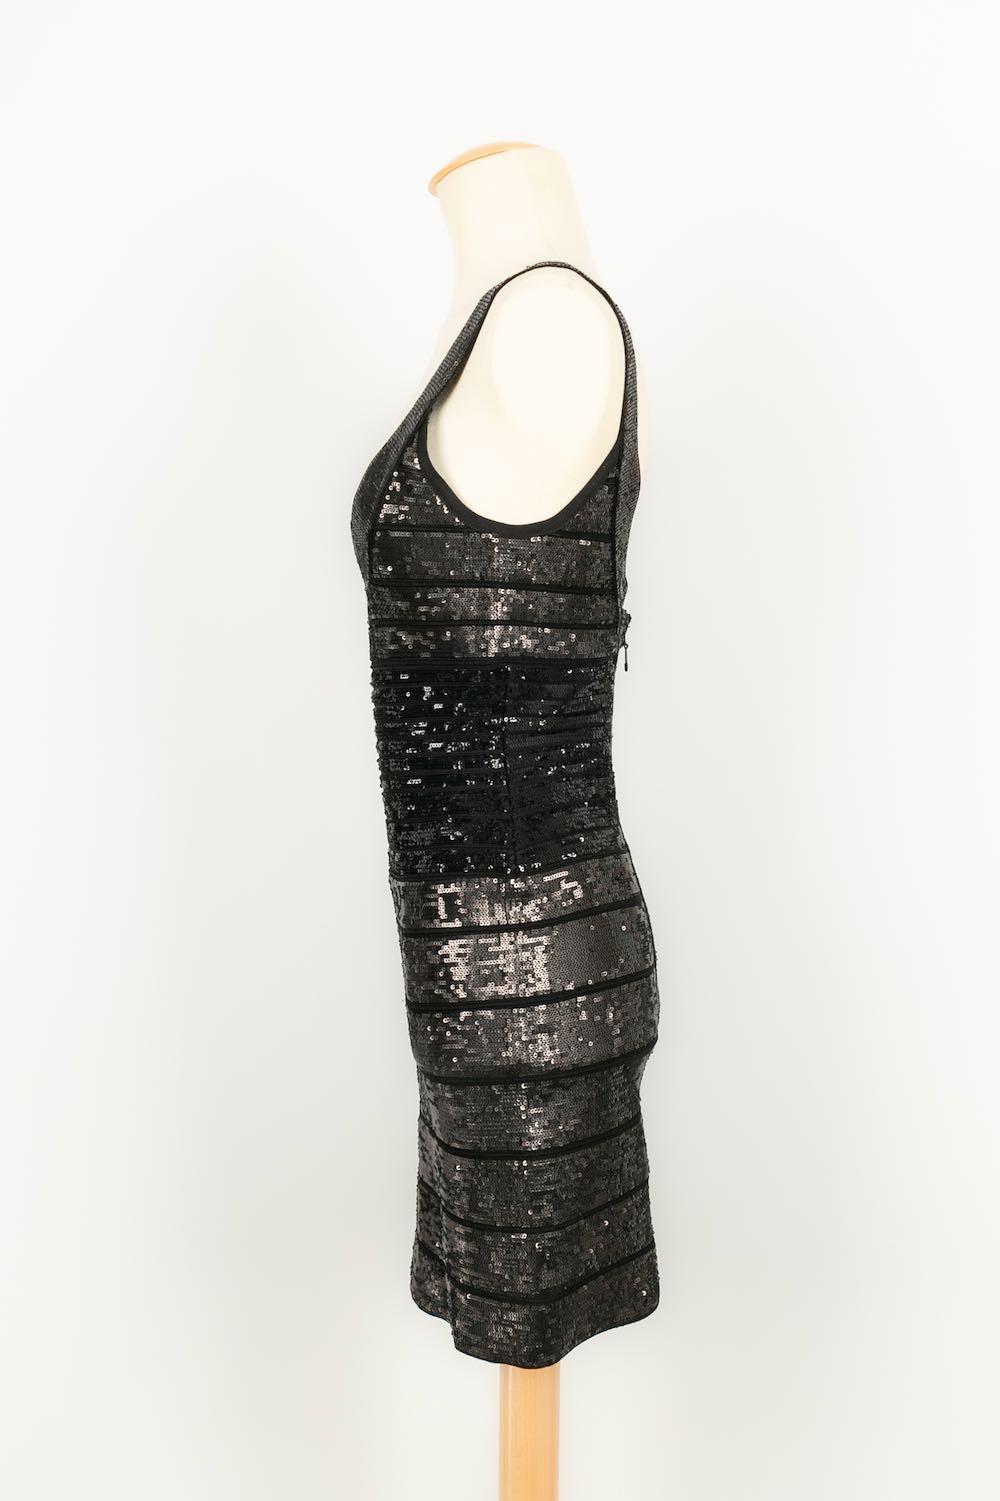 Hervé Léger -Black mesh dress embroidered with sequins. Size S.

Additional information:

Dimensions: 
Chest: 36 cm, Length: 85 cm
Condition: Very good condition
Seller Ref number: VR101